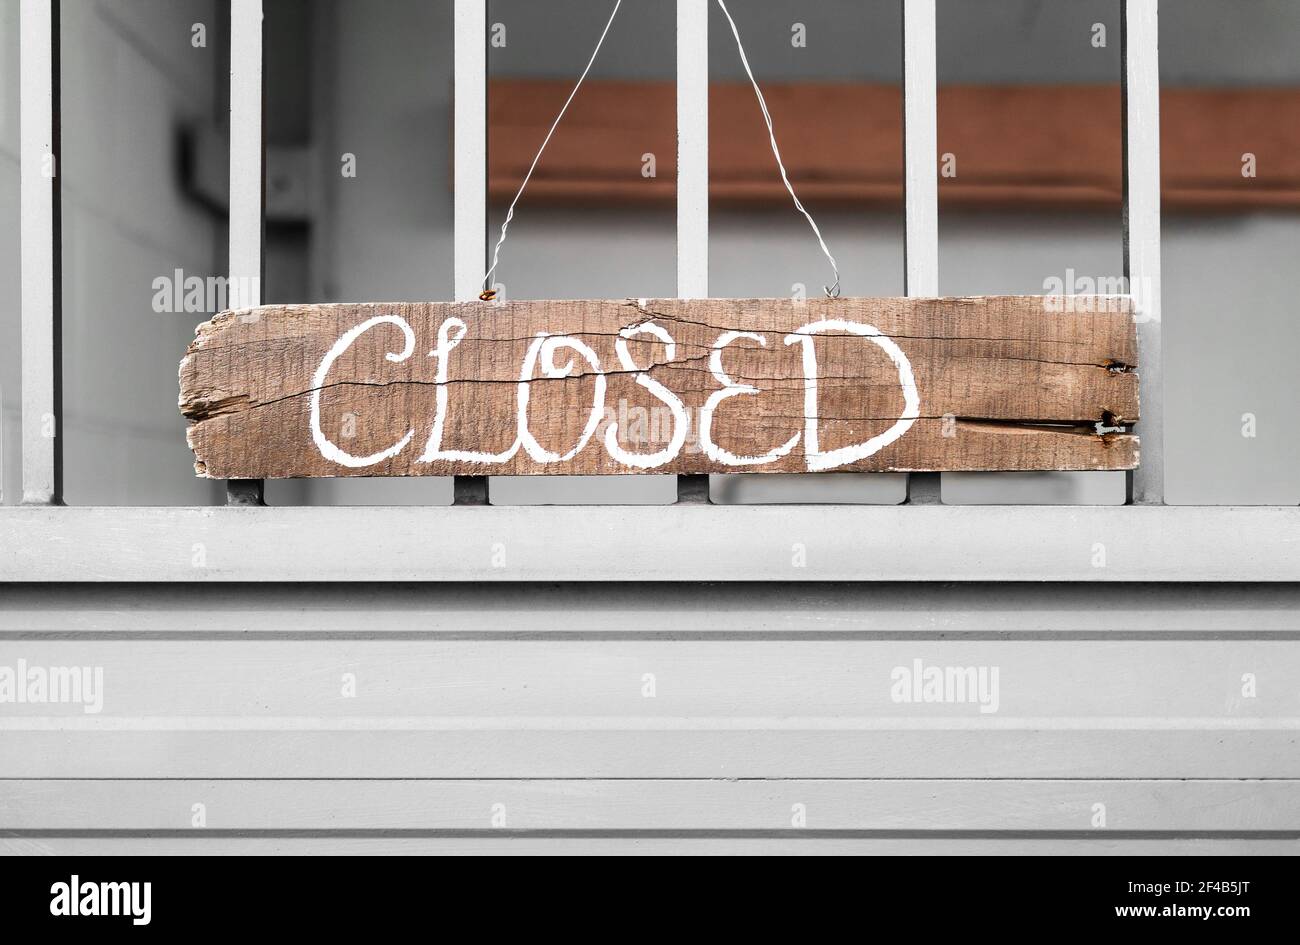 Closed sign. Handcrafted brown ragged wood sign with white handwritten letters. The signage hangs on a gate held with metal wires. Concept for busines Stock Photo